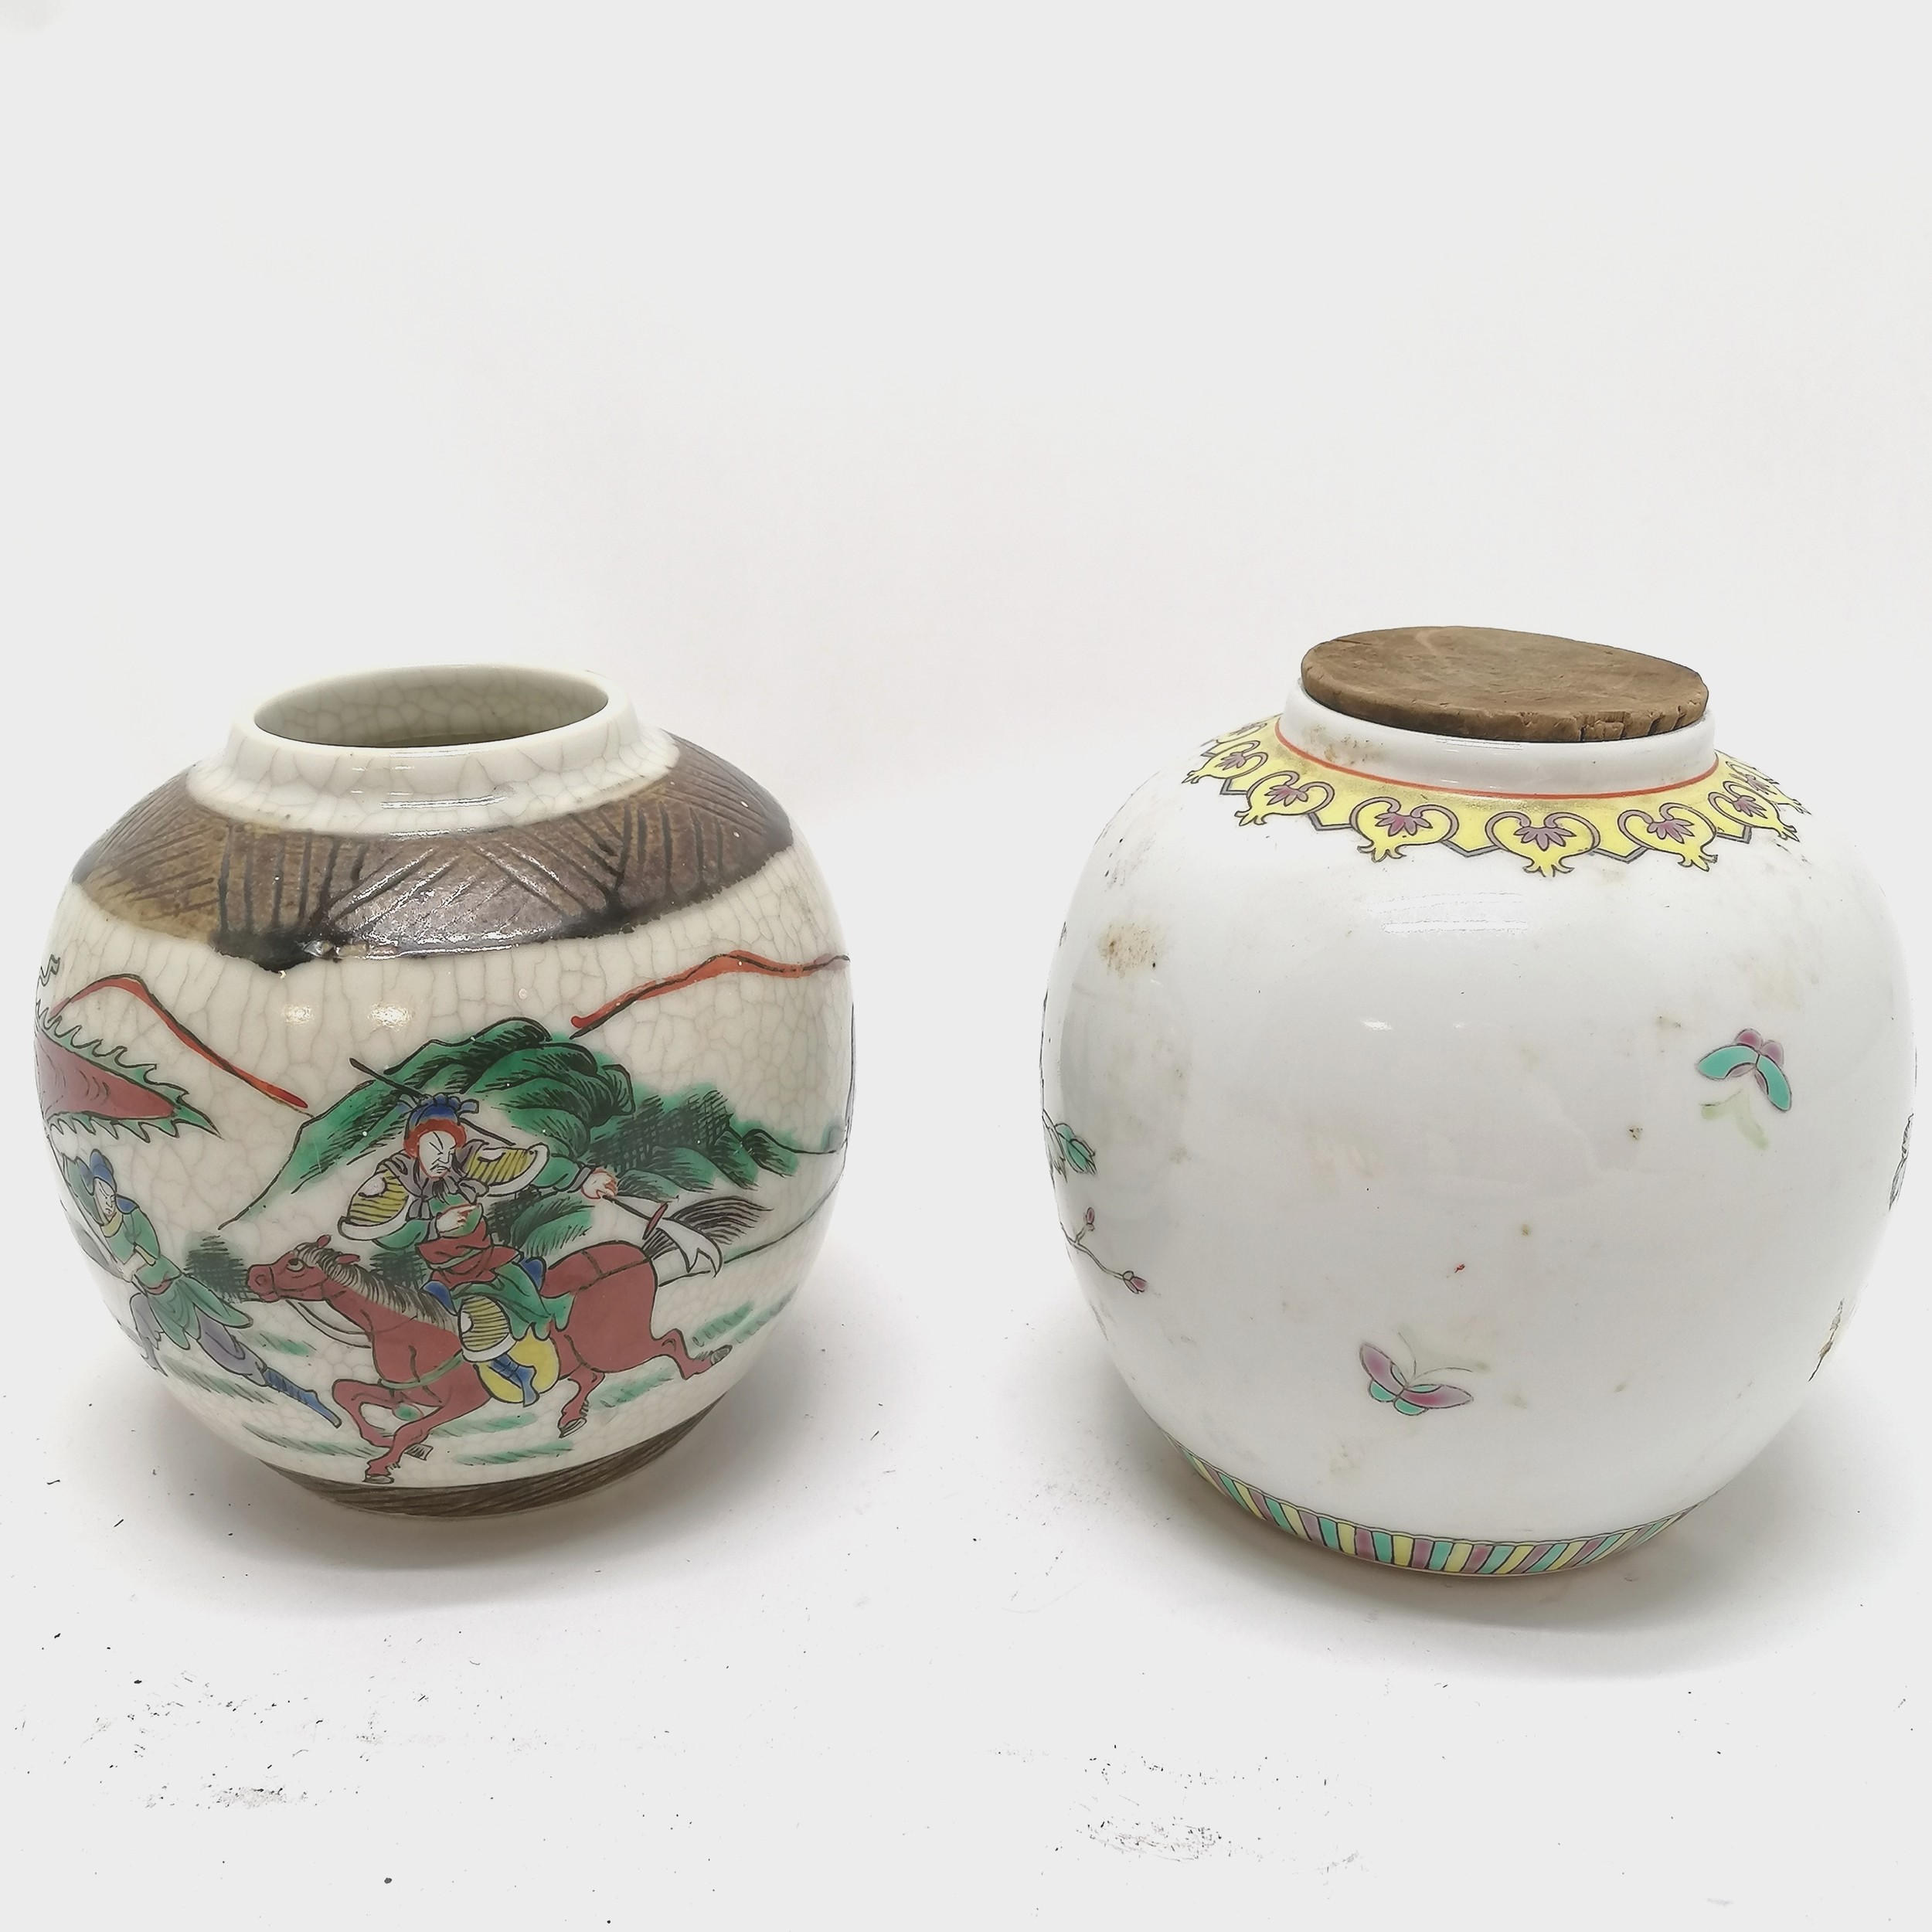 2 x Chinese ginger jars - 1 with a battle scene - tallest (with bung) 13cm - Image 3 of 3